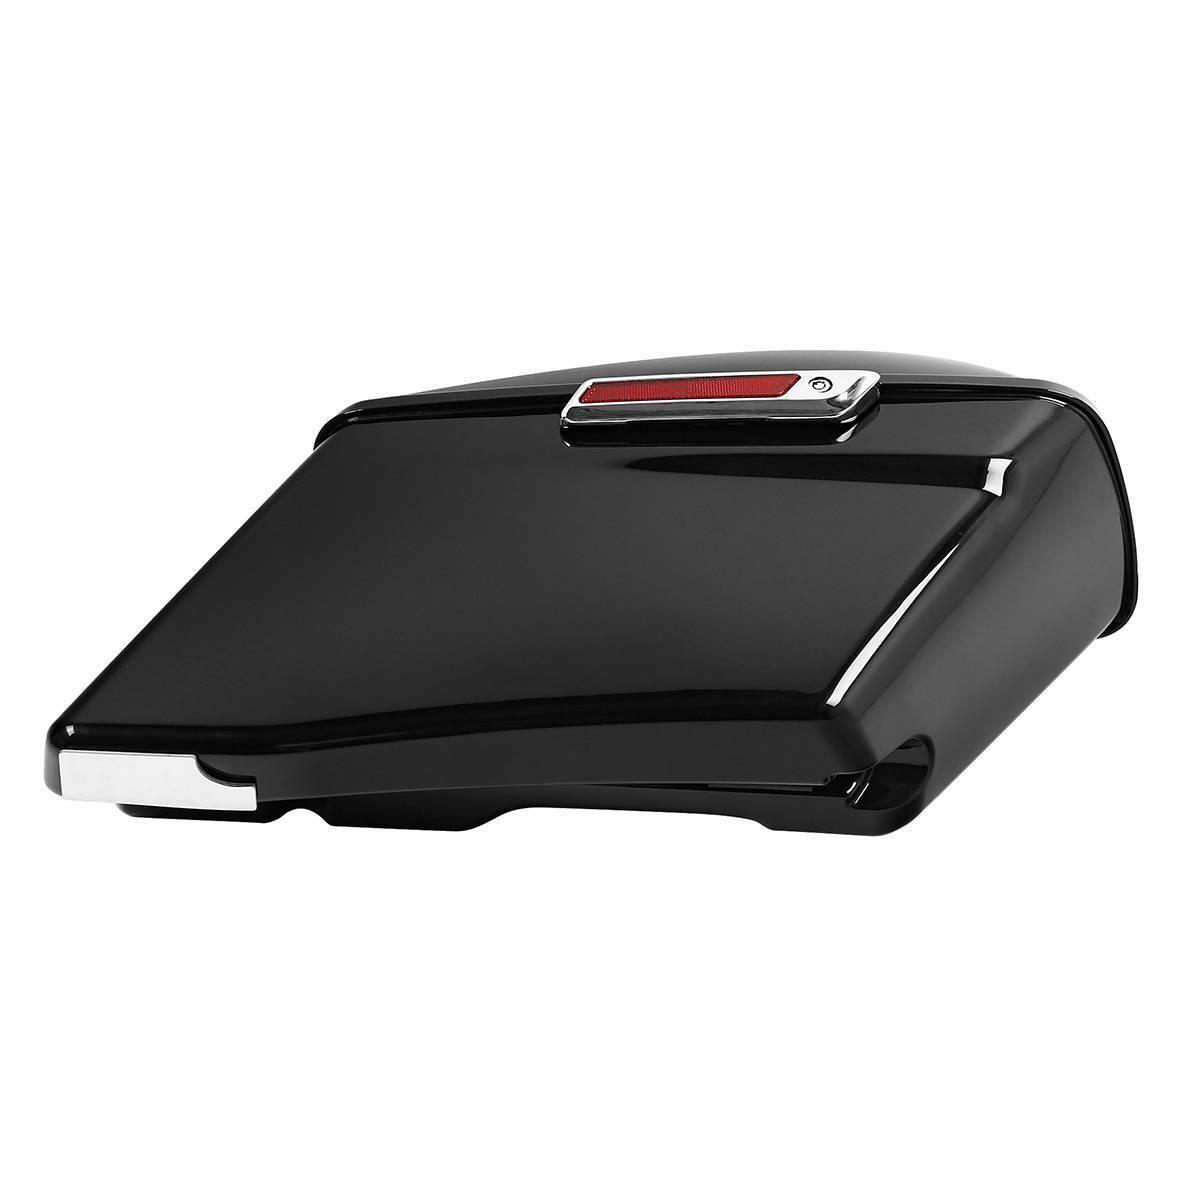 4" Stretched Extended Saddlebags Fit For Harley CVO Touring Road Glide 1993-2013 - Moto Life Products